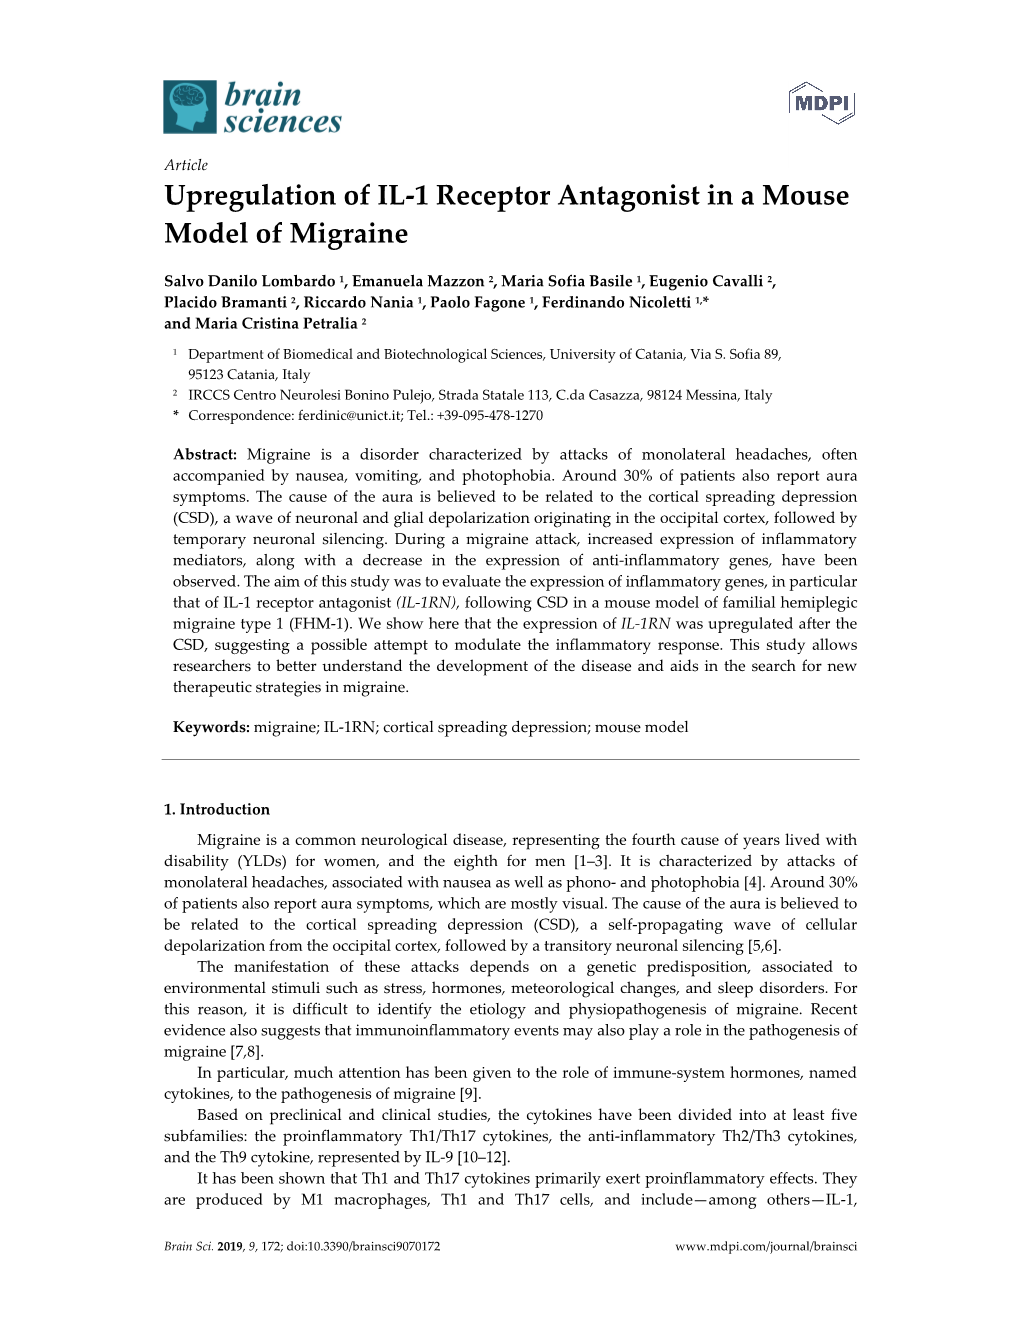 Upregulation of IL-1 Receptor Antagonist in a Mouse Model of Migraine